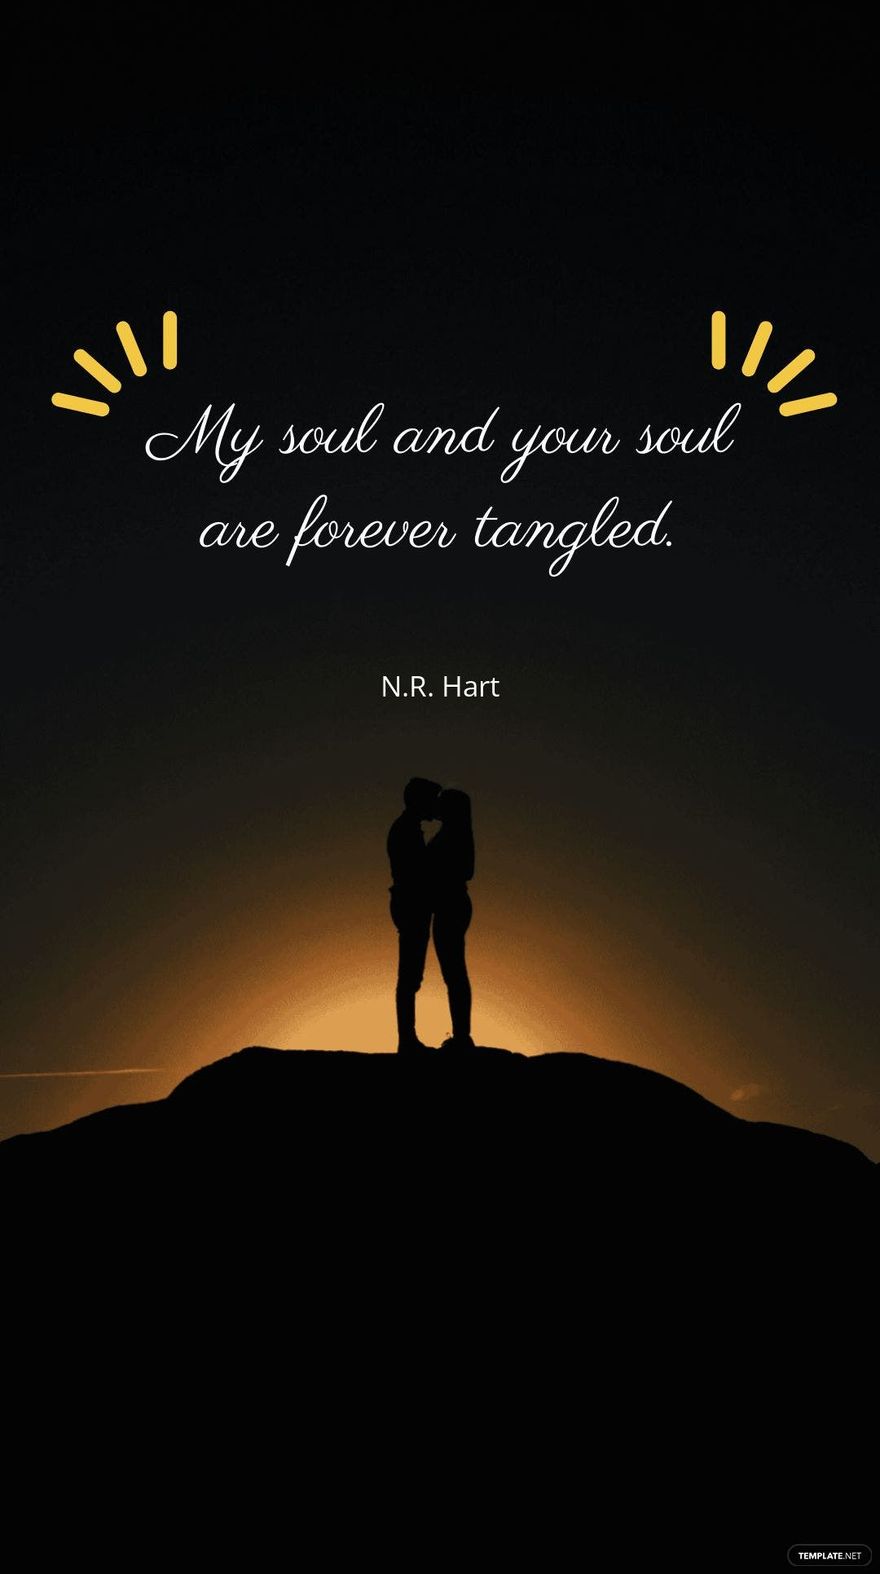 N.R. Hart - “My soul and your soul are forever tangled.”